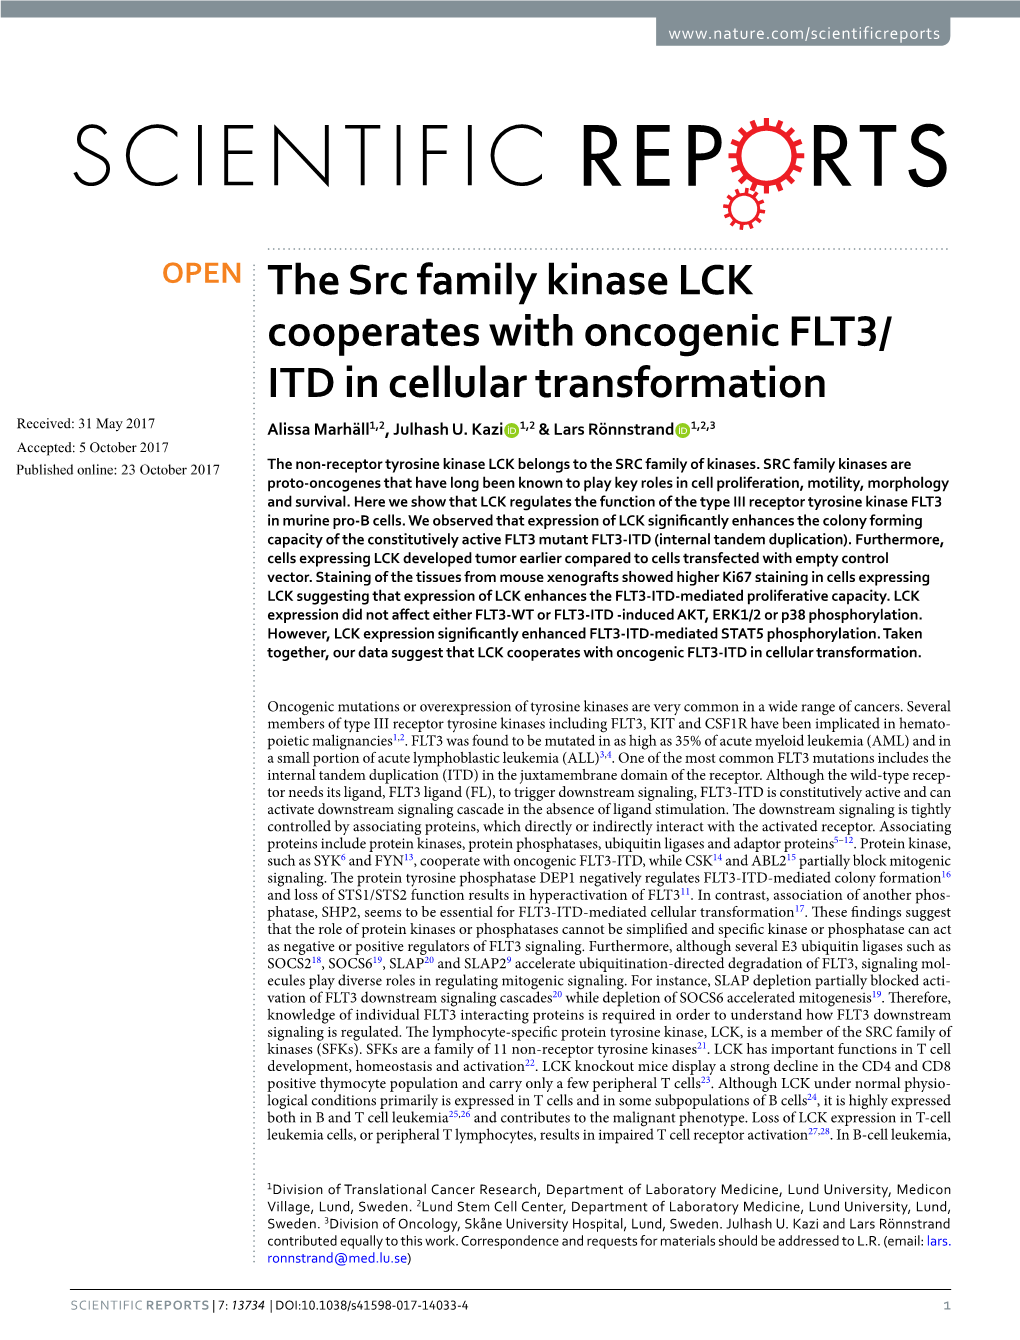 The Src Family Kinase LCK Cooperates with Oncogenic FLT3/ ITD in Cellular Transformation Received: 31 May 2017 Alissa Marhäll1,2, Julhash U